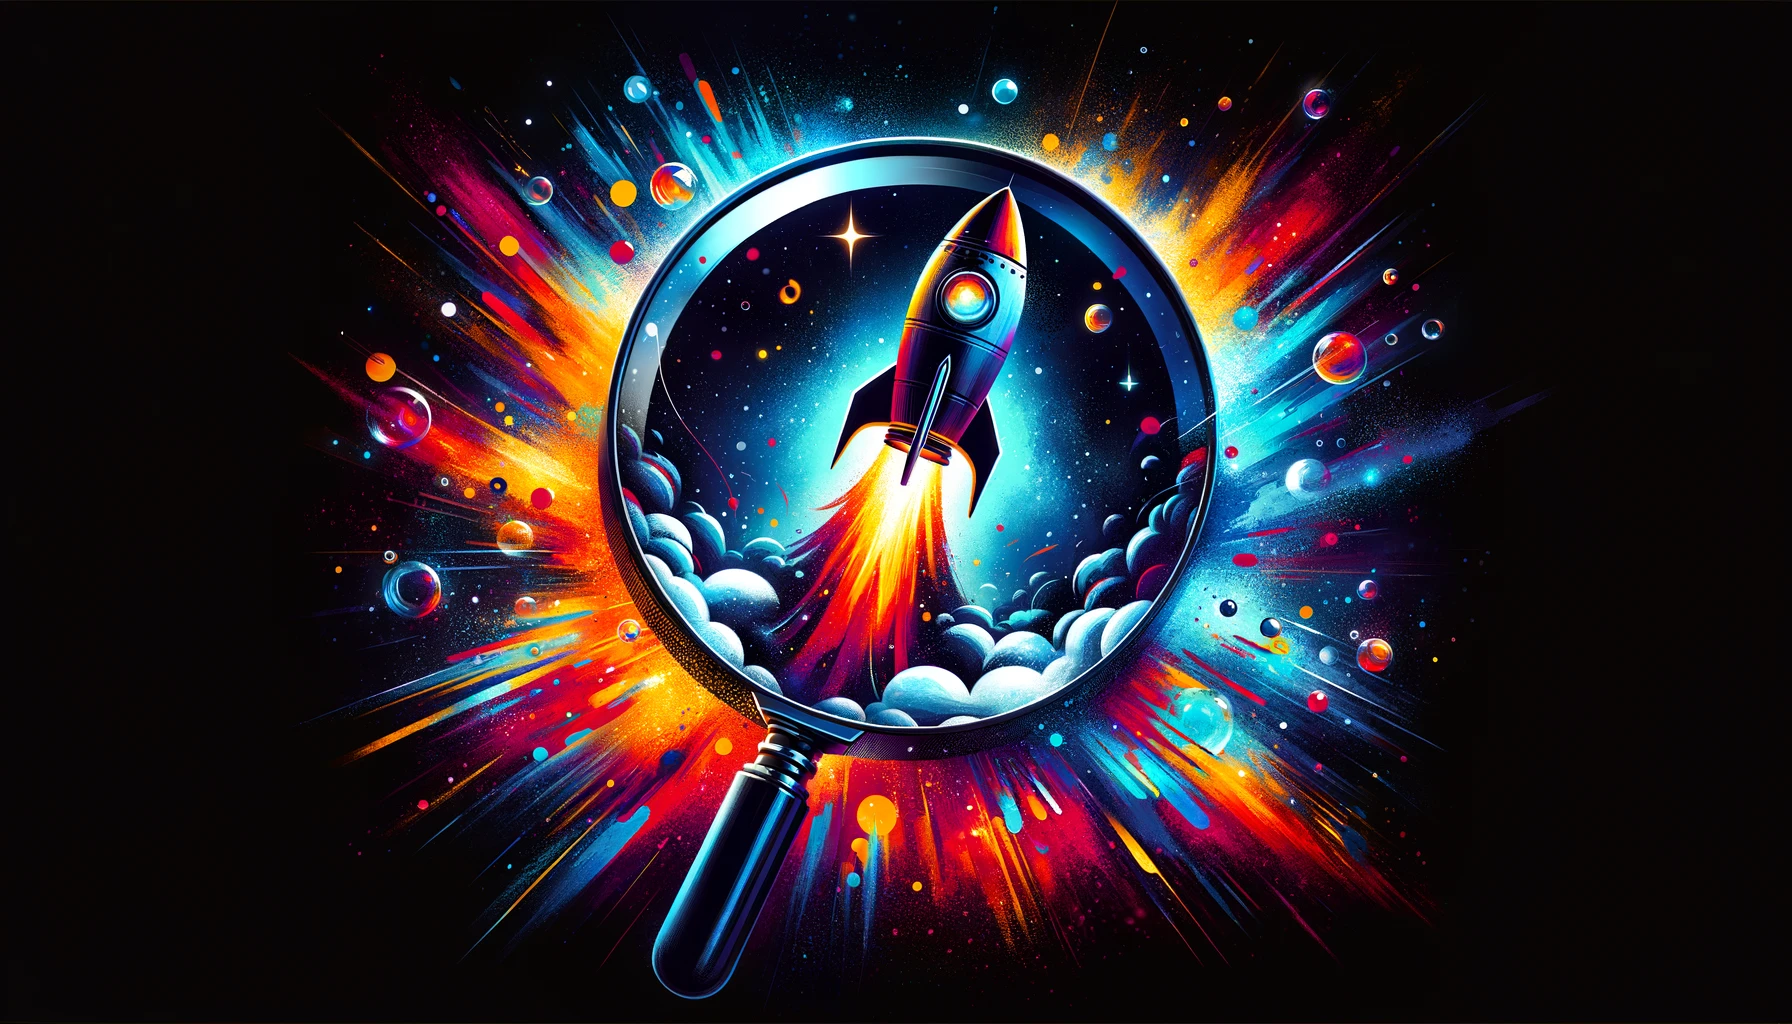 Rocket inside a magnifying glass with stars and vibrant colors. depicting rocket growth